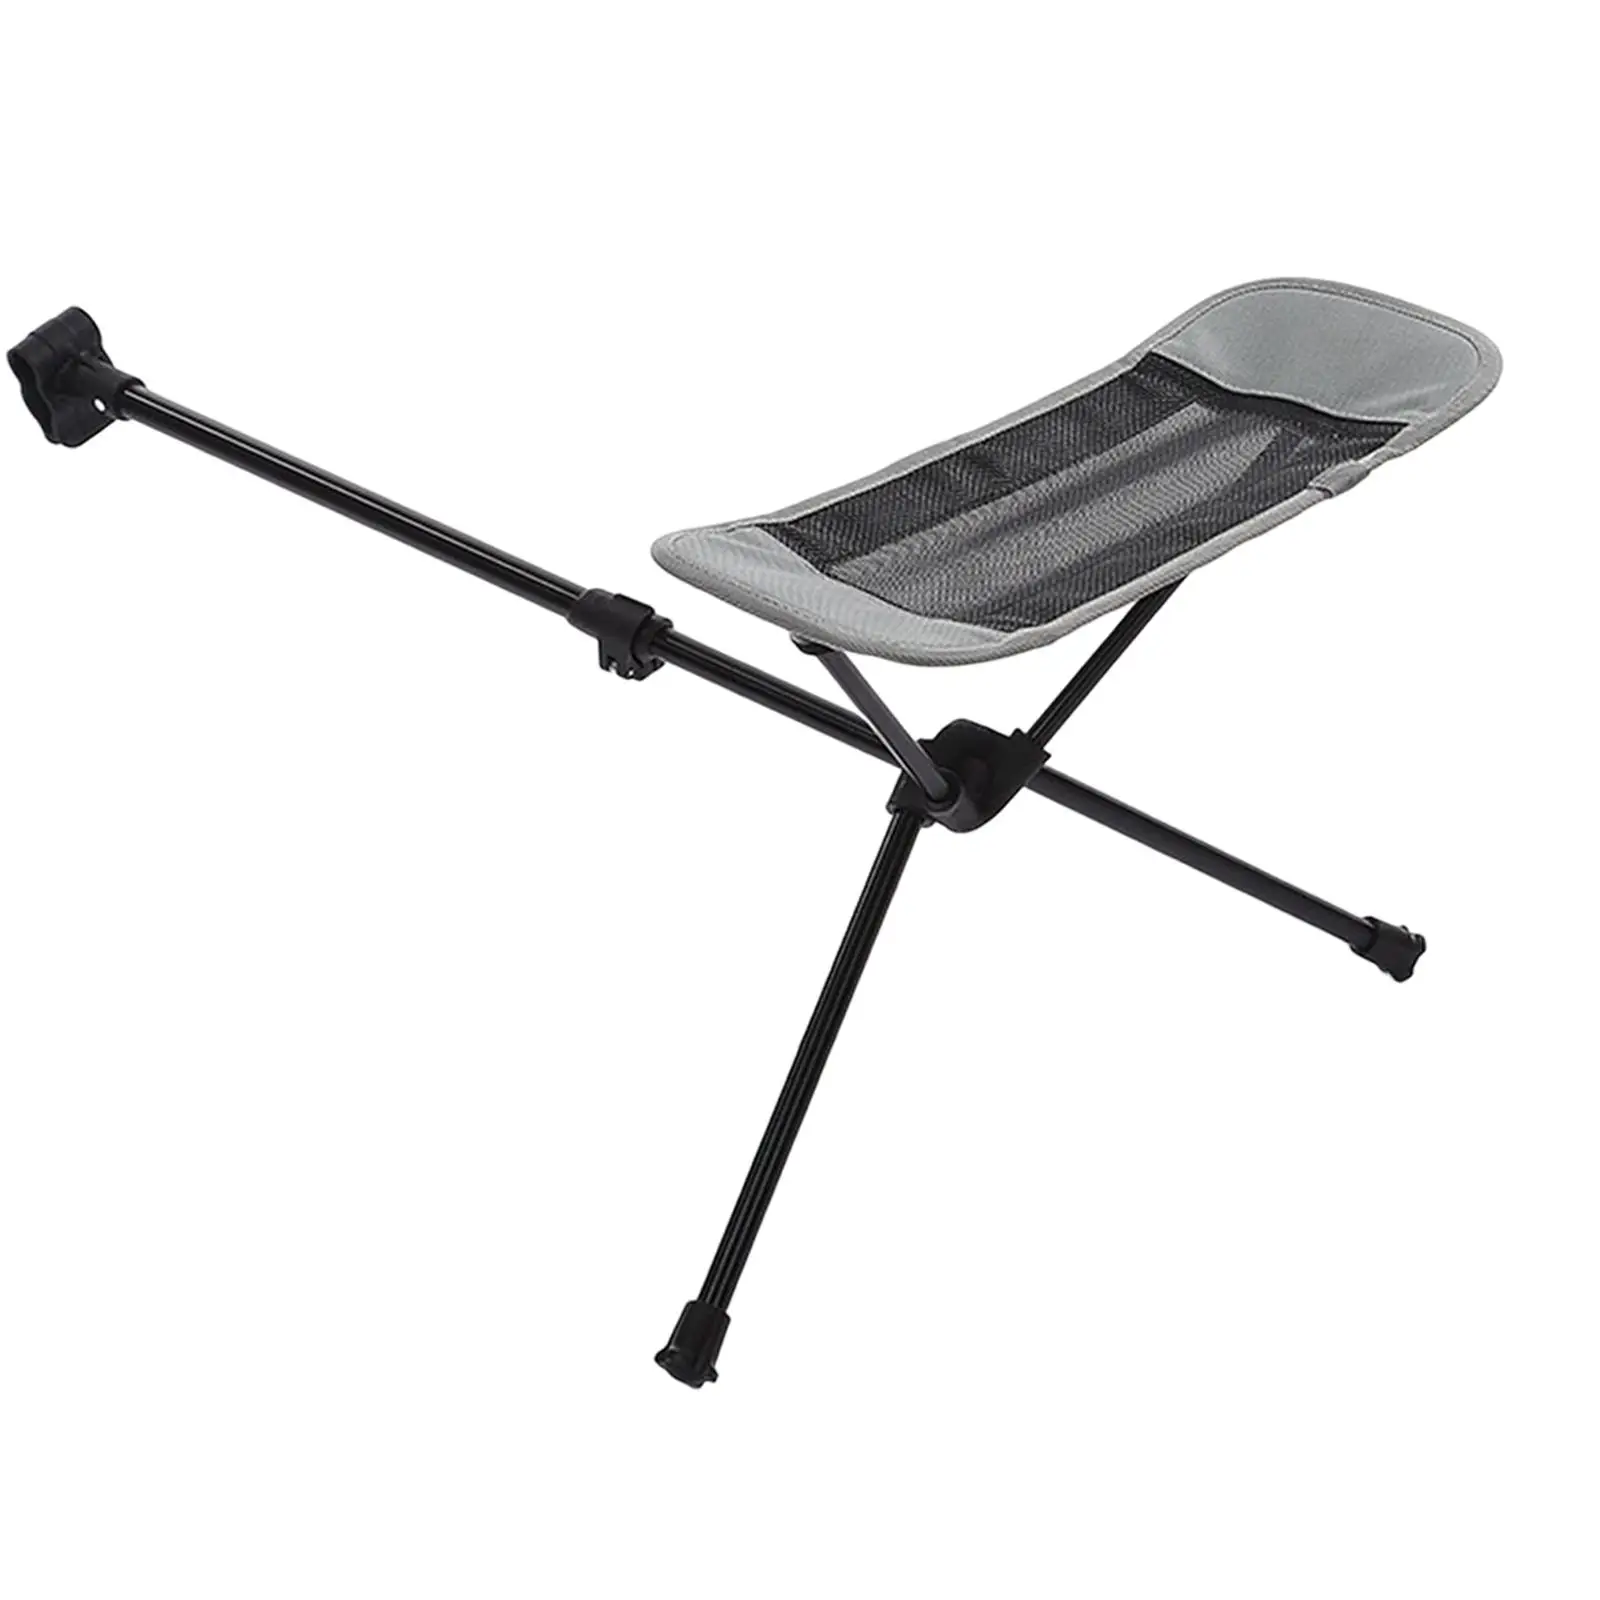 Portable Folding Chair Footrest Antislip Camping Hiking Recliner Footstool Feet Rest Bracket Lazy Seat Foot Rest